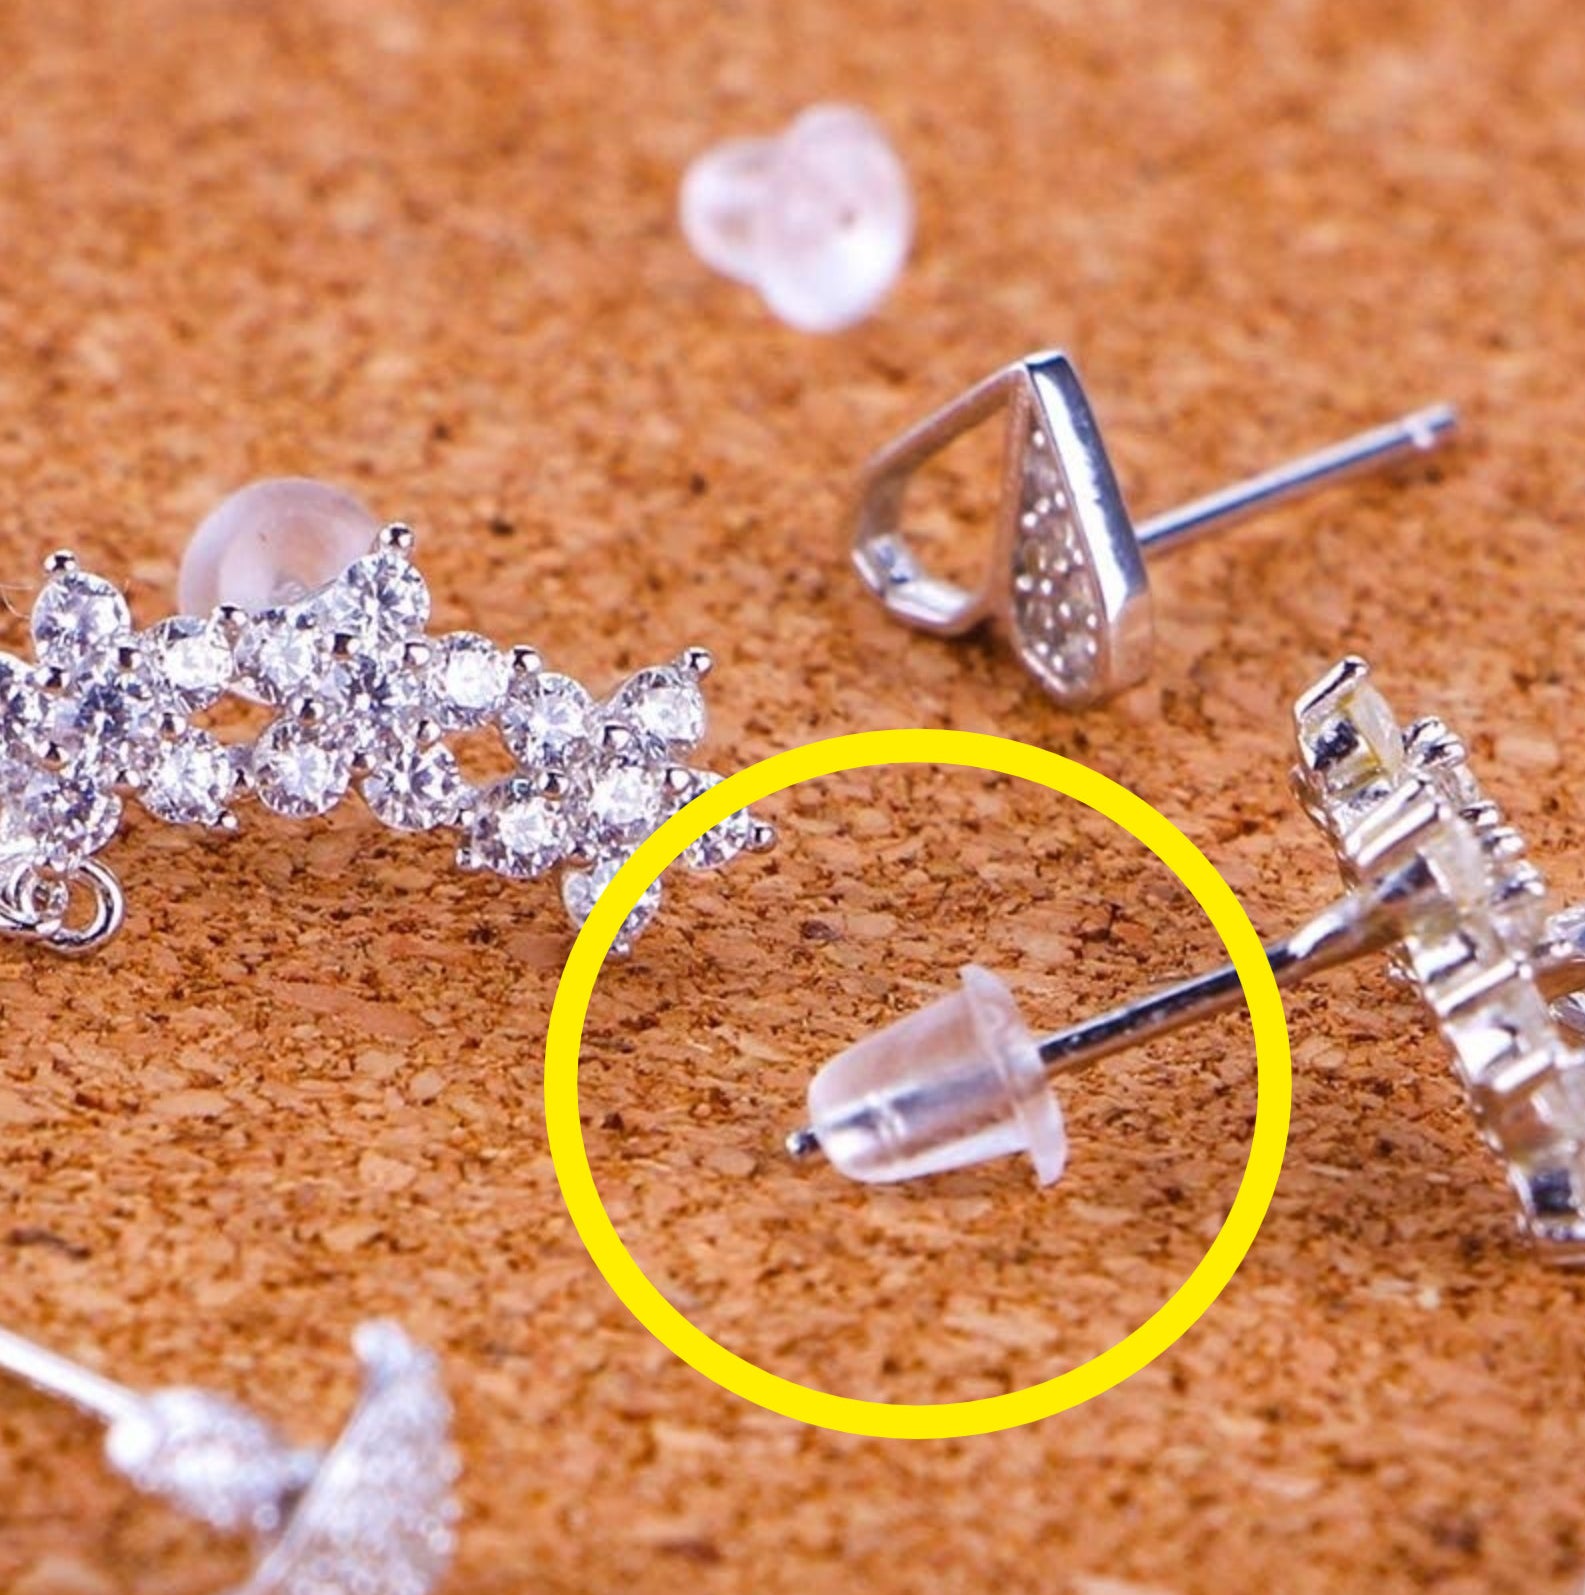 Plastic earring backs attached to several studs